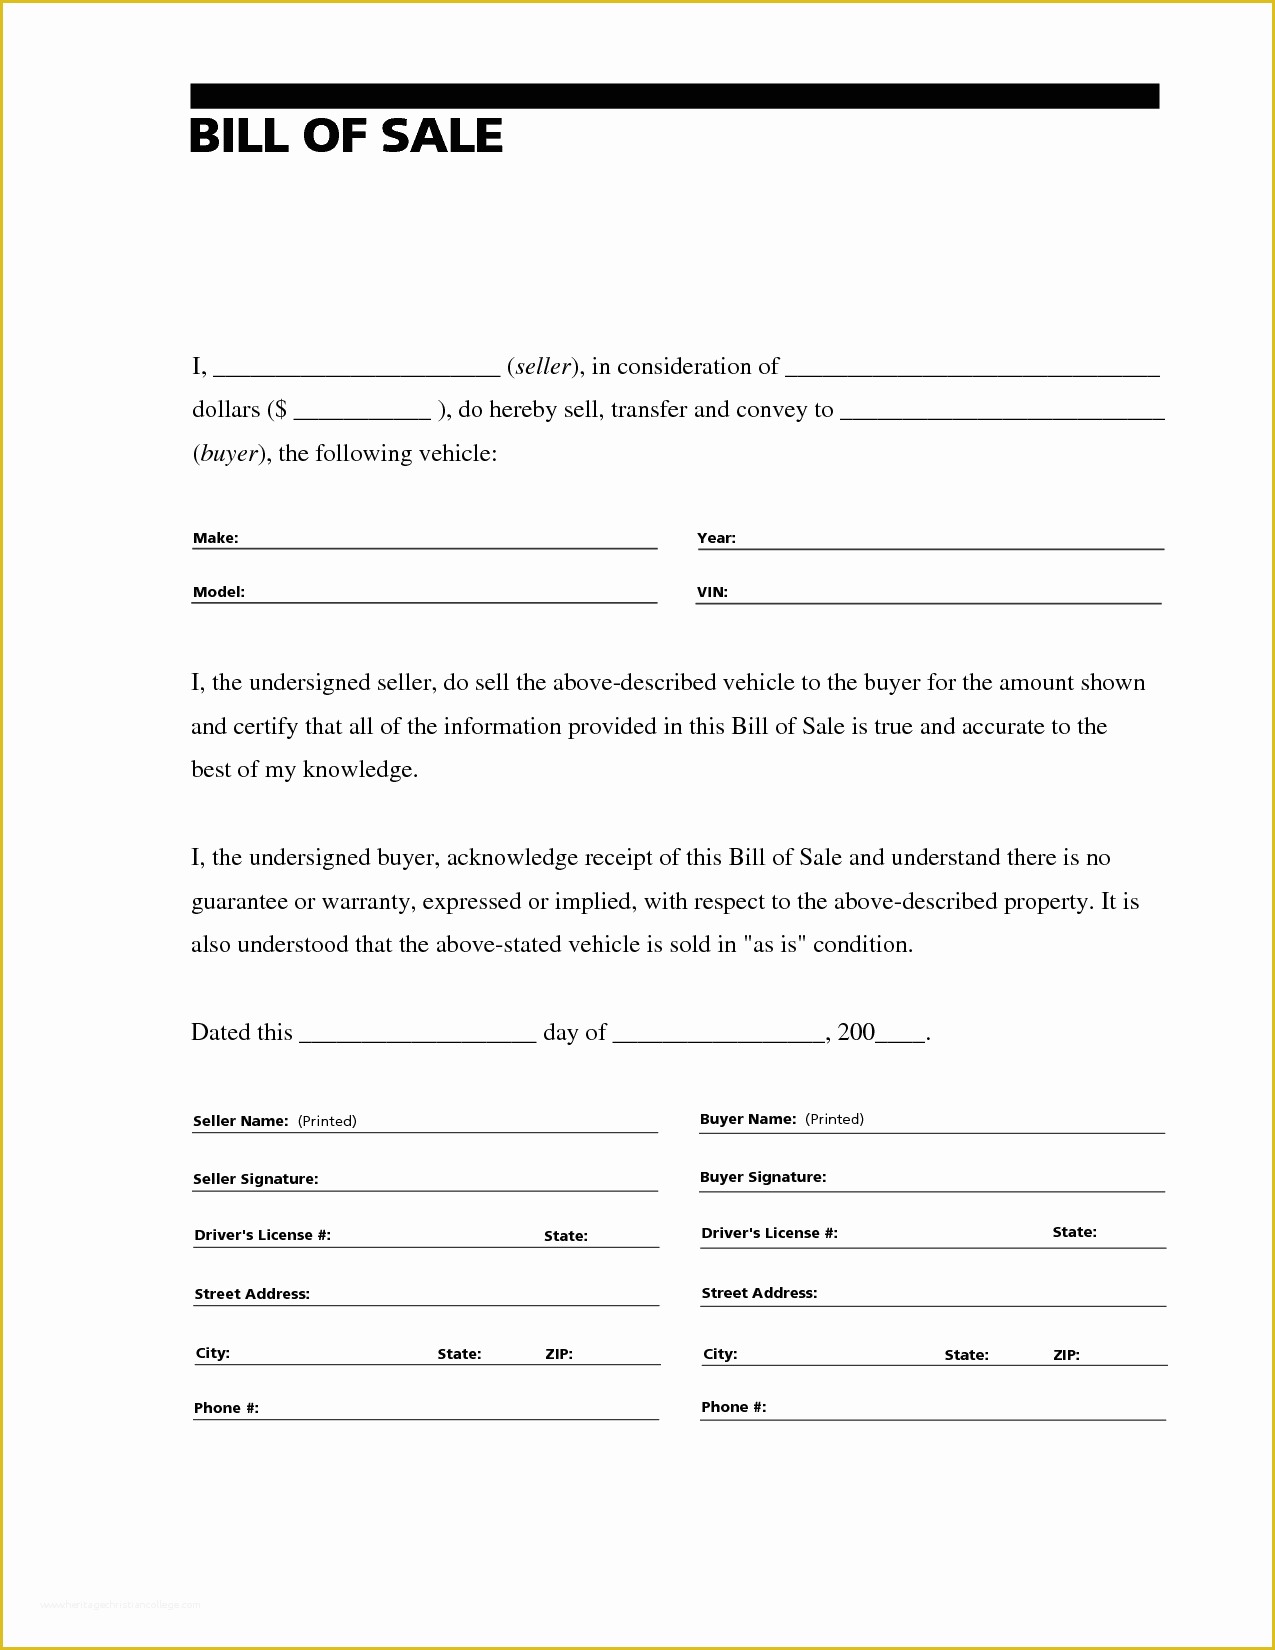 Free Bill Of Sale Template for Car Of Printable Sample Free Car Bill Of Sale Template form